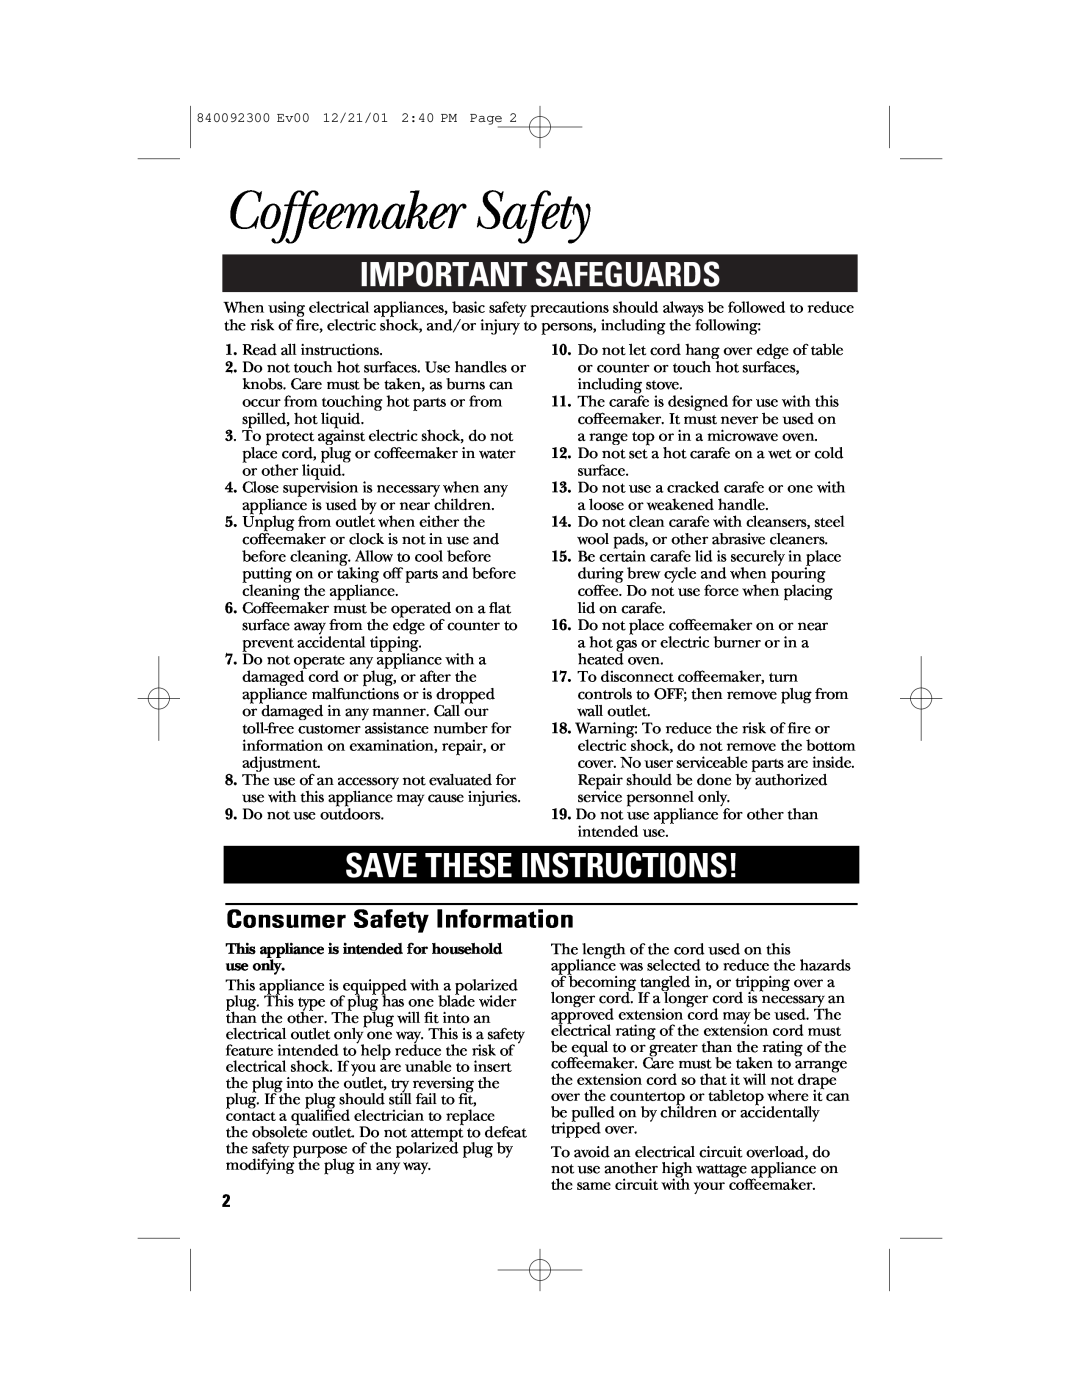 GE 840092300, 106804 manual Coffeemaker Safety, Important Safeguards, Save These Instructions, Consumer Safety Information 